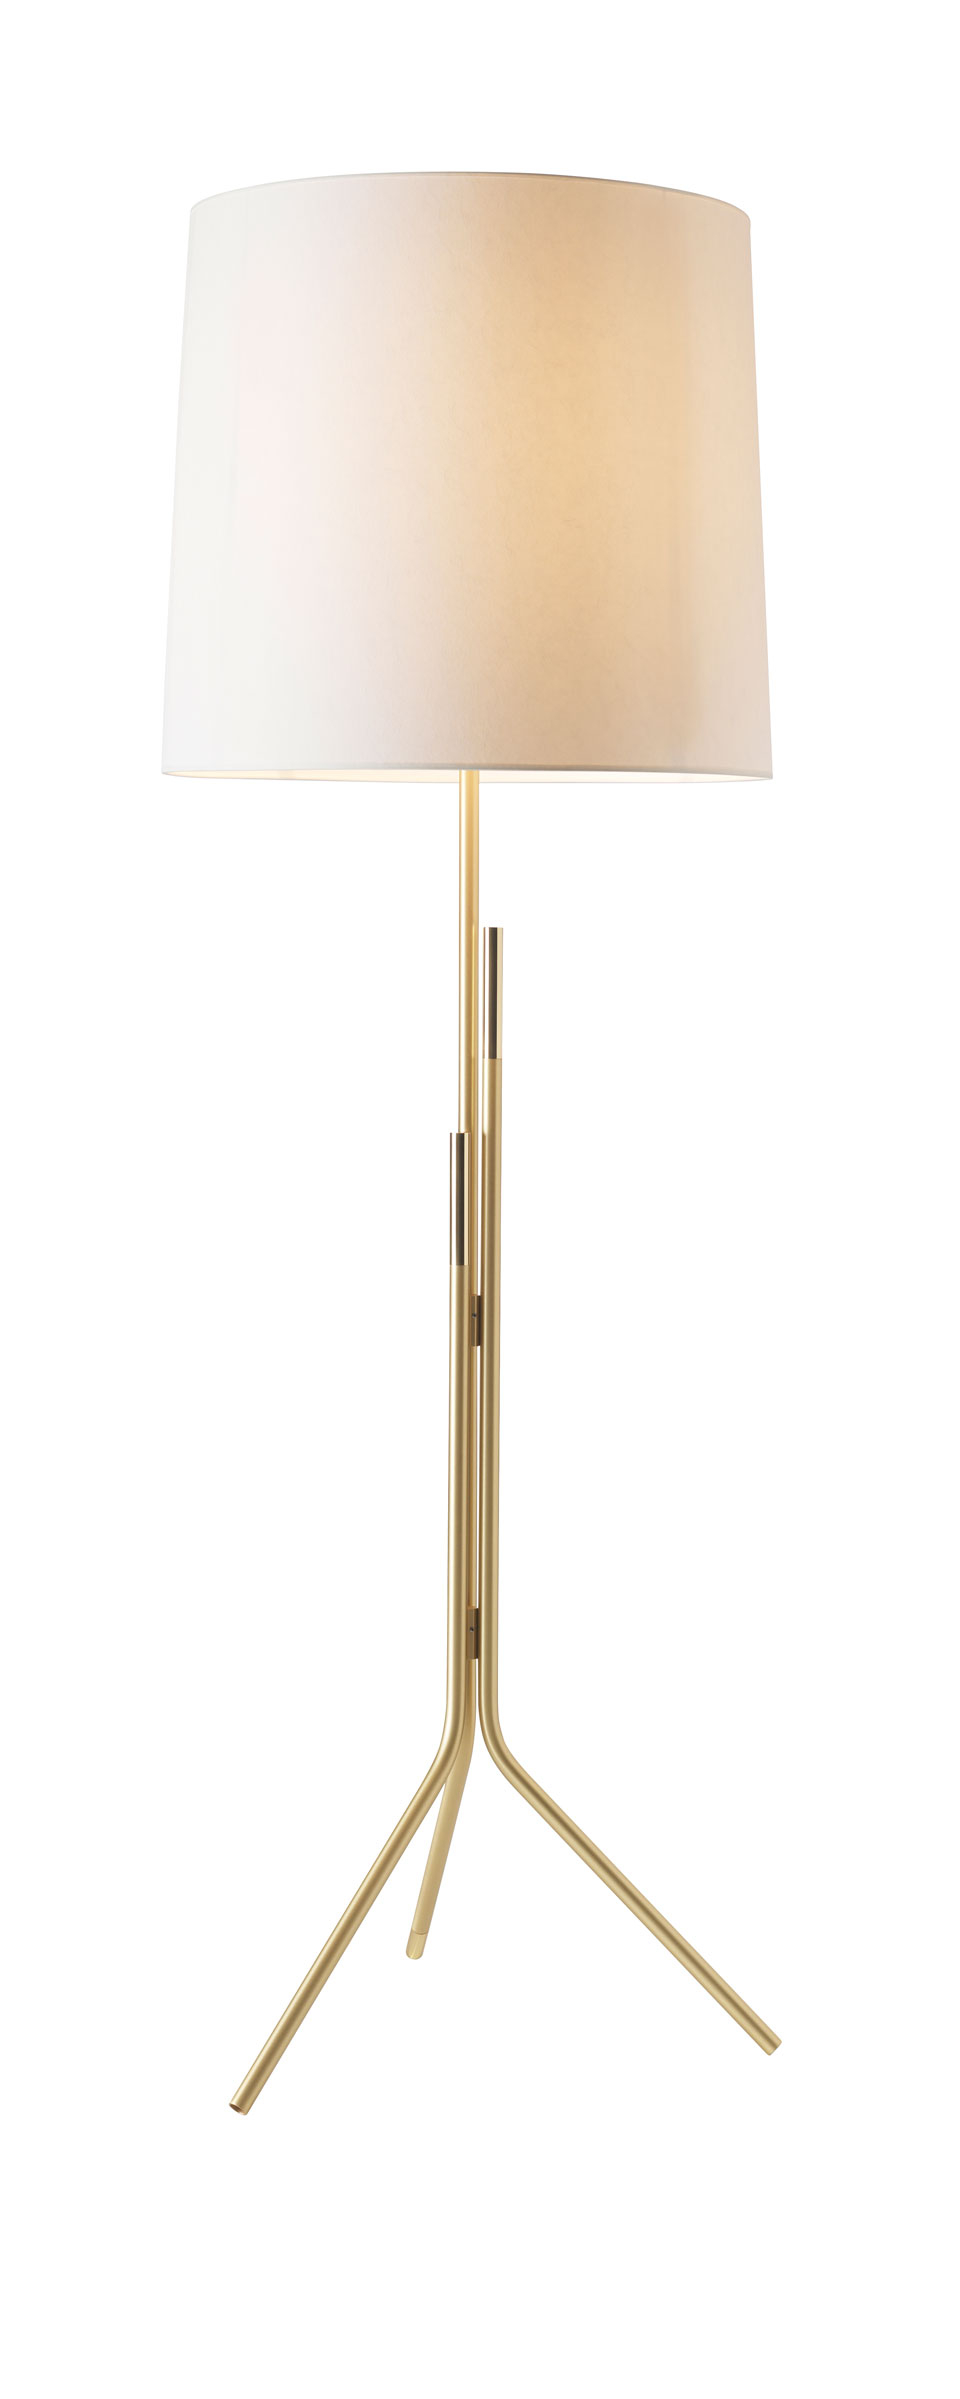 Contemporary Floor Lamp Brass Stand Cylindrical Shade In White Drop Paper Design Herv Langlais within proportions 960 X 2399